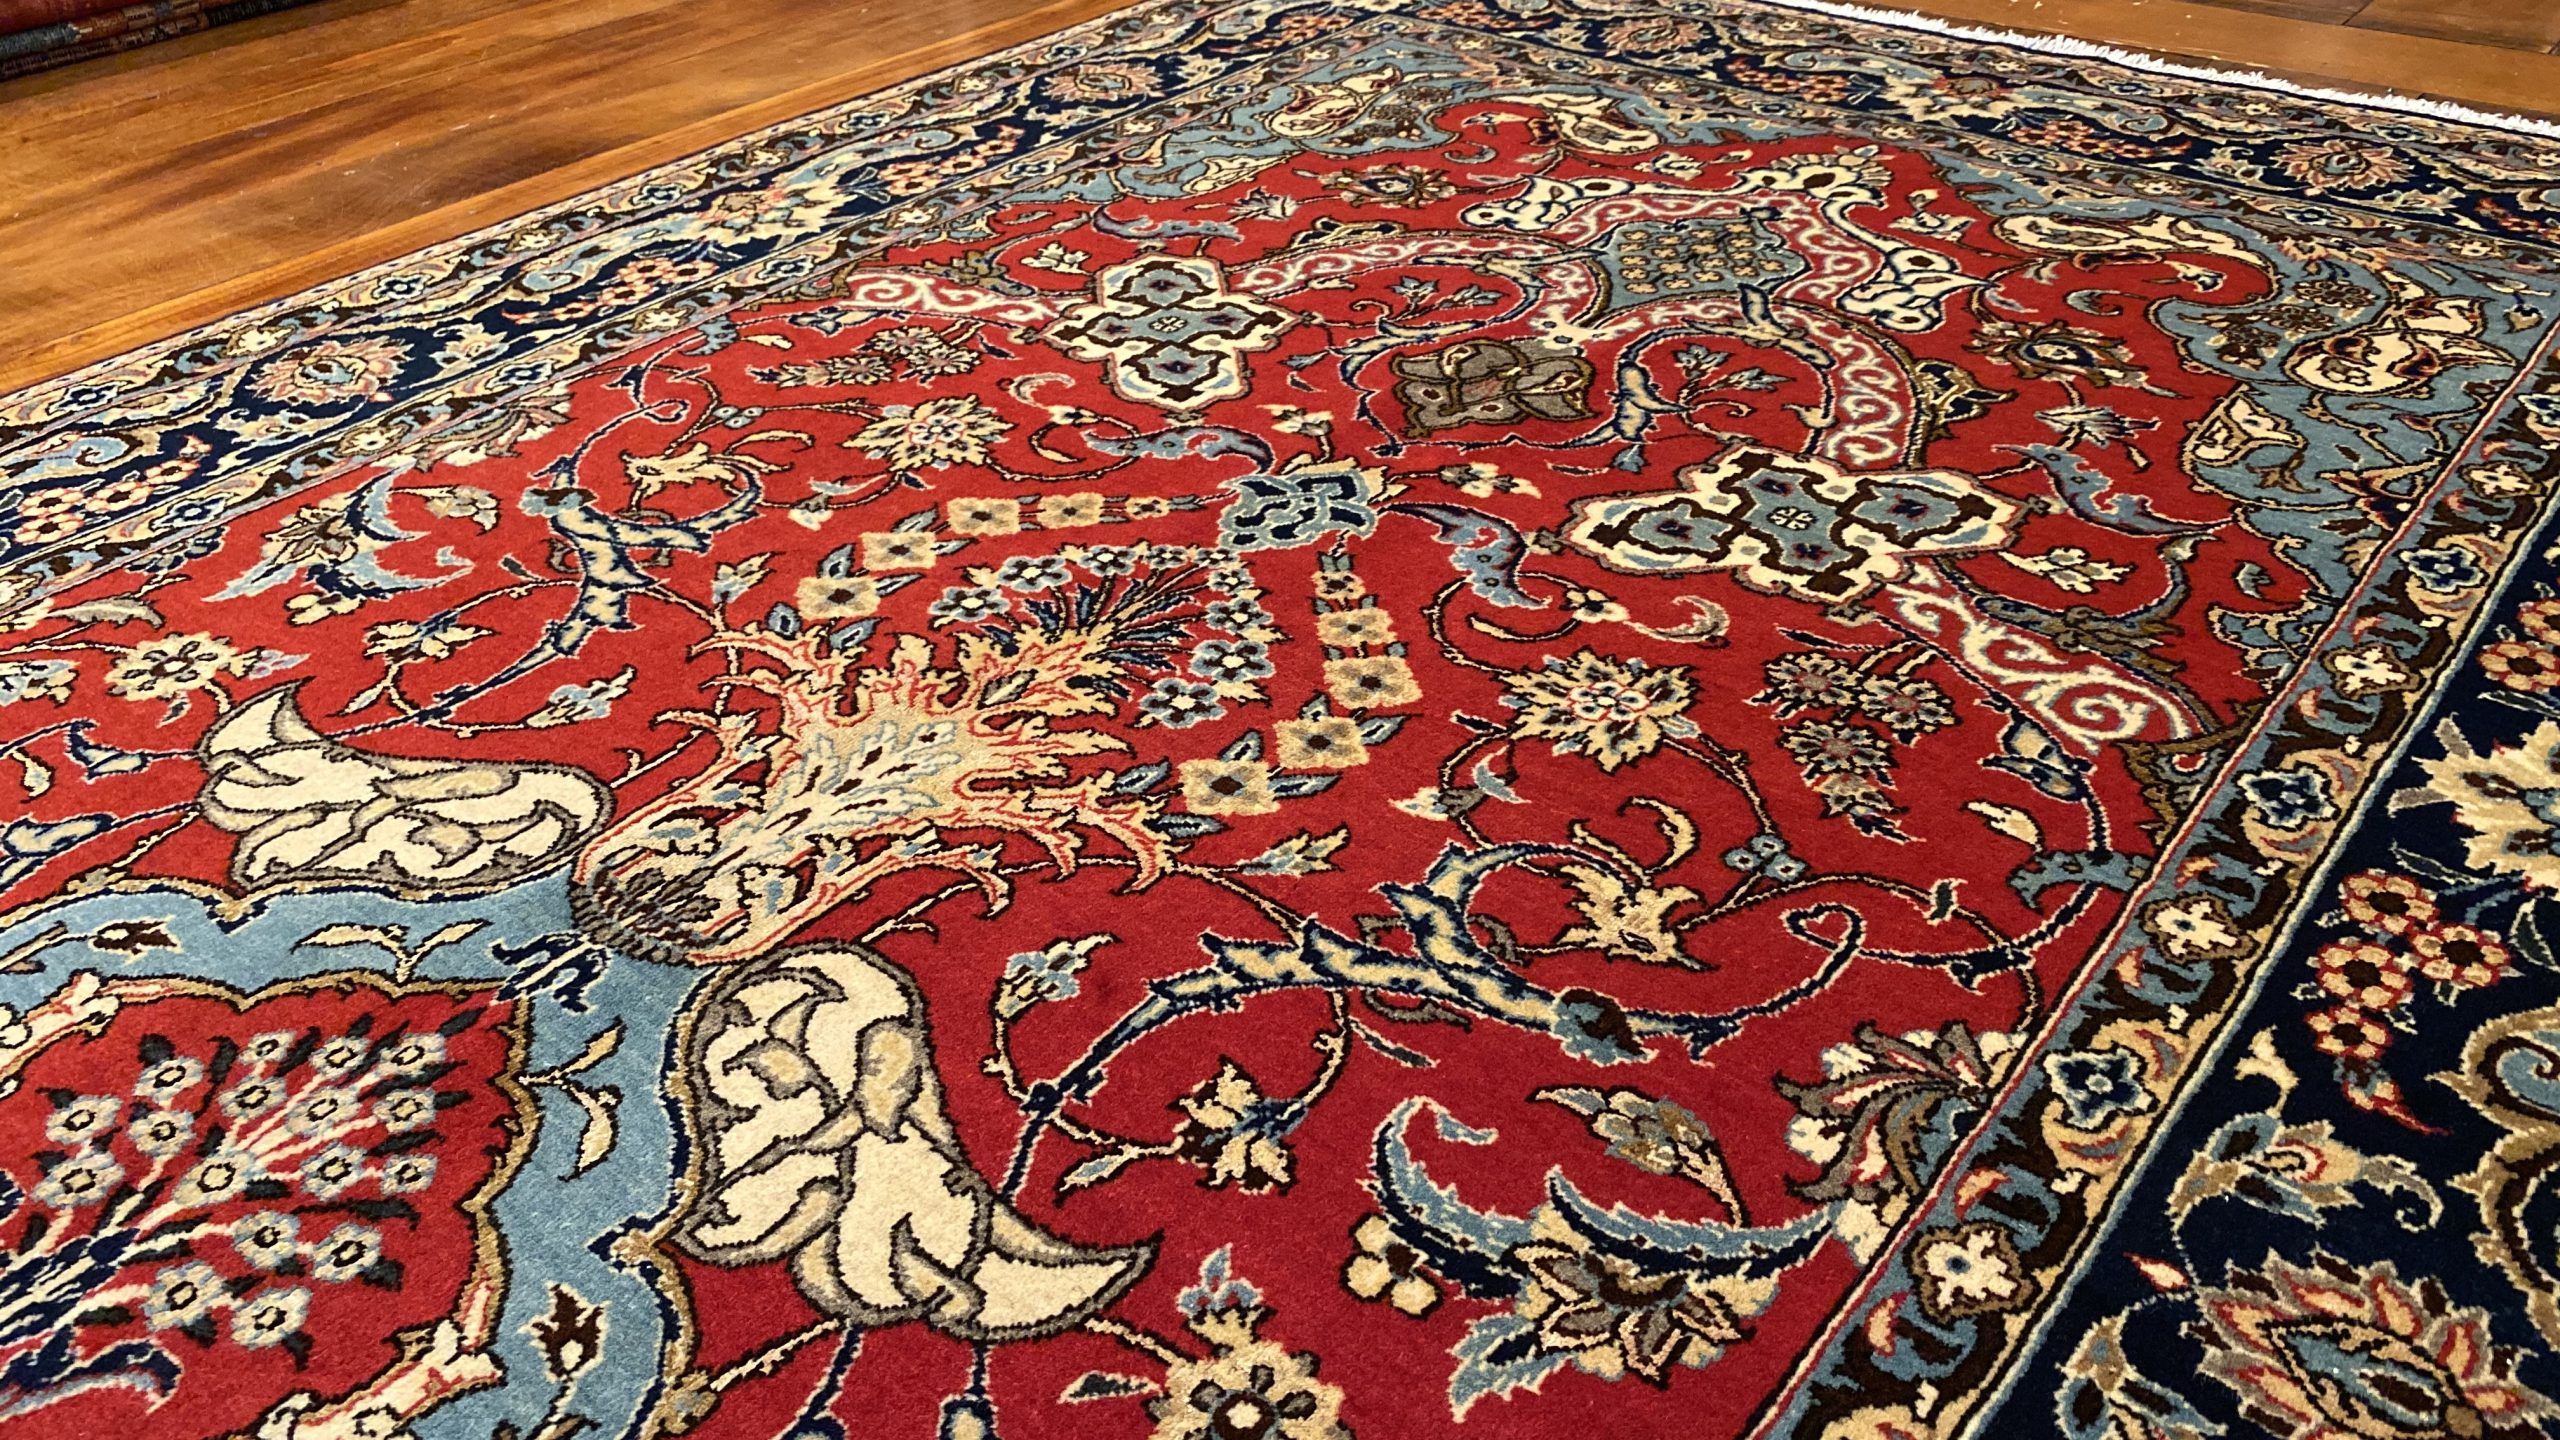 Rug# 5852, vintage Qum wool pile, circa 1945, silk inlay, immaculate, Persia, size 210x140 cm, RRP $8000 , on special $3000 (5)